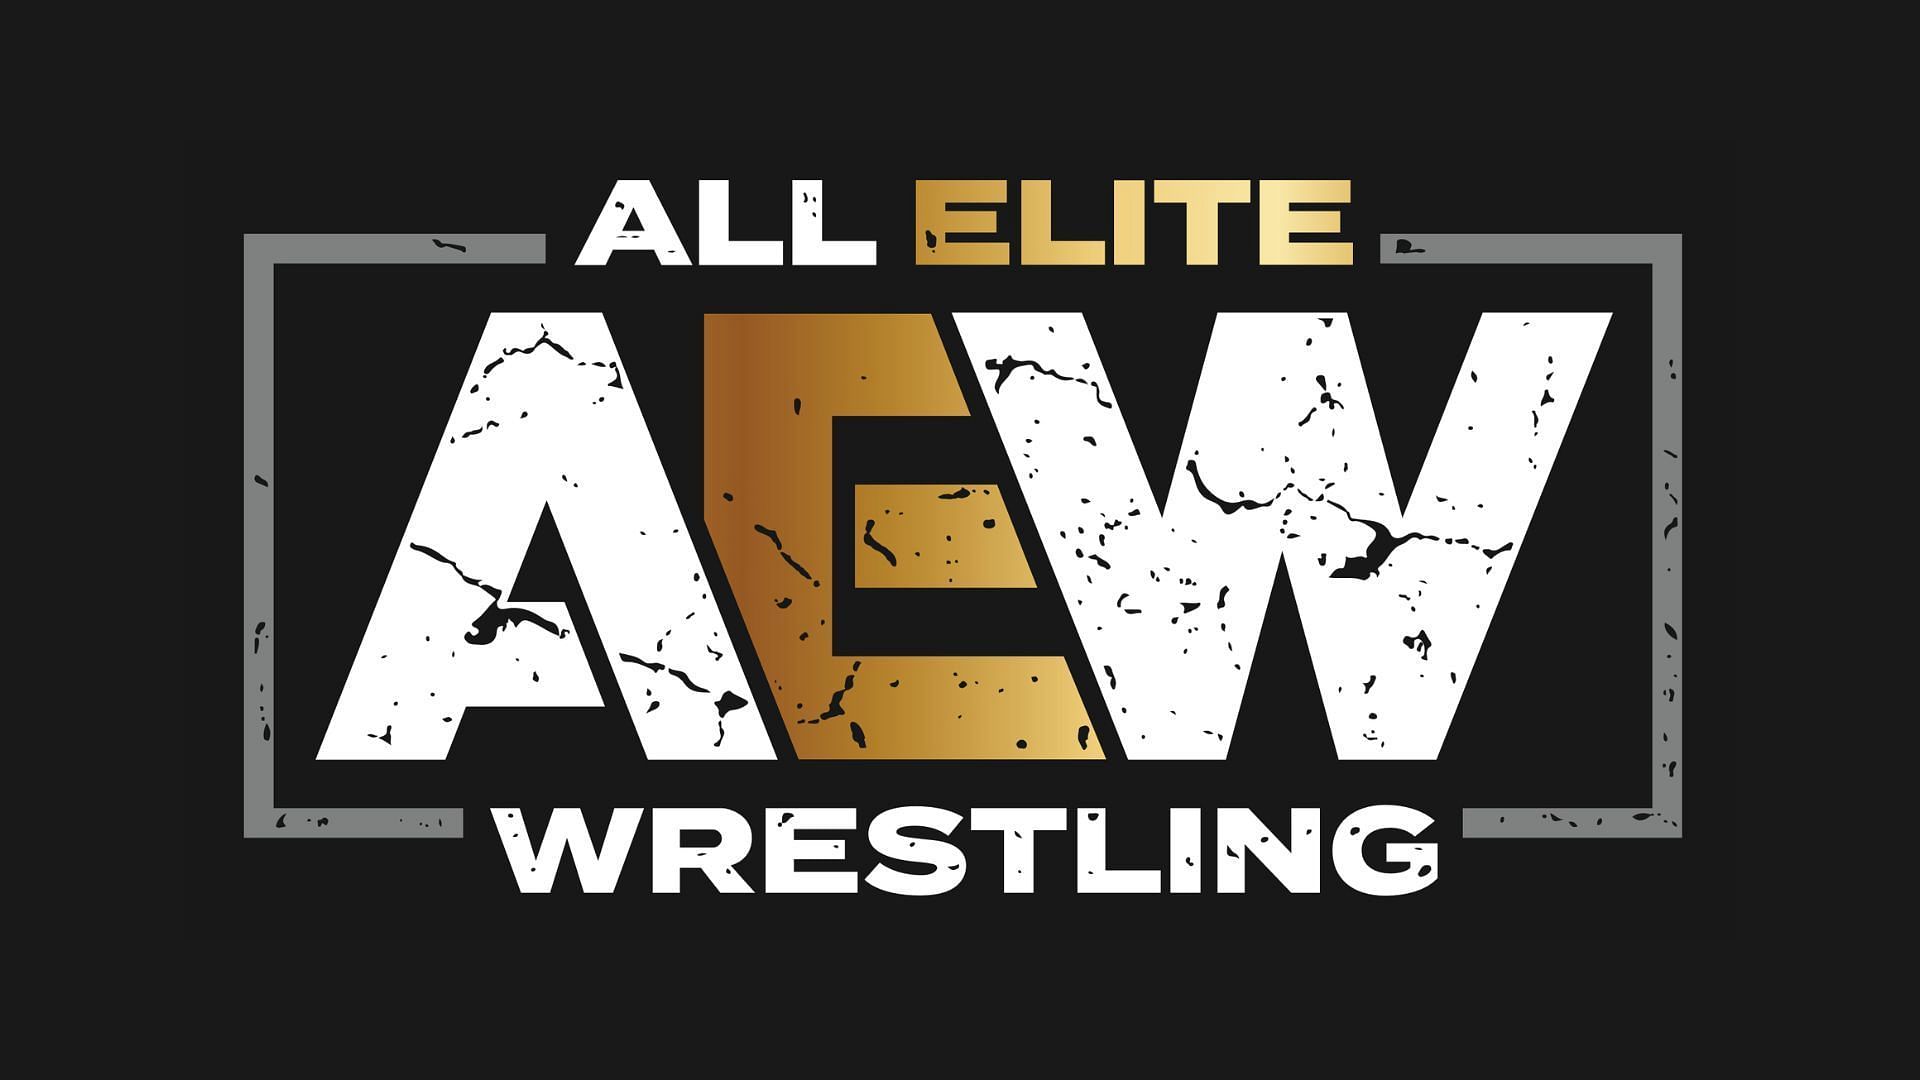 One of the most hated man in AEW defends himself for being hateable